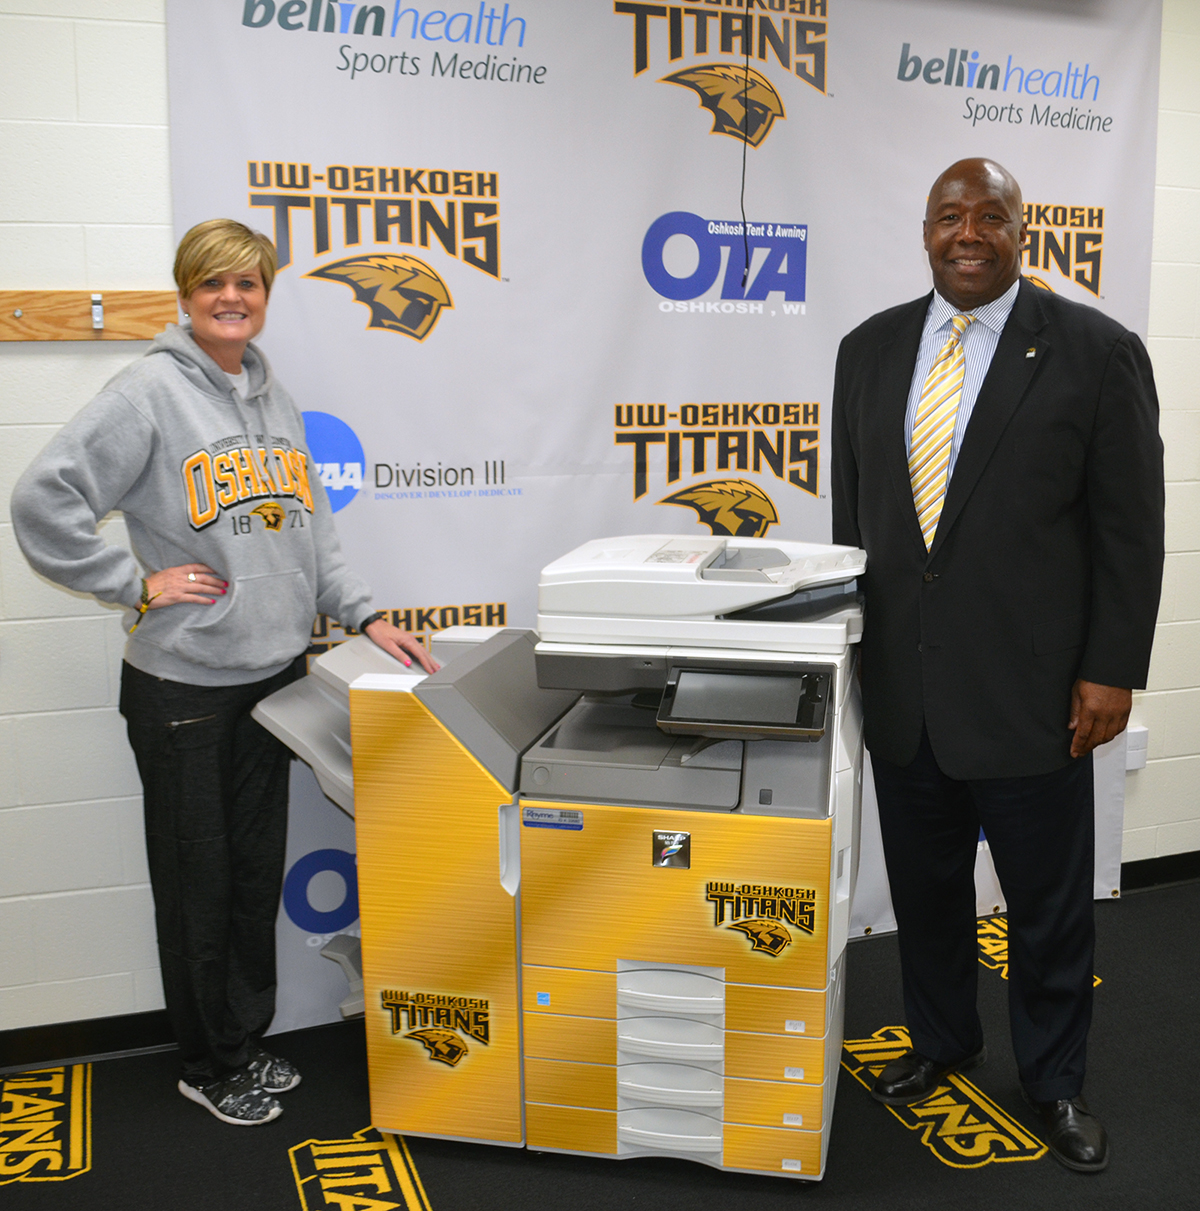 UW-Oshkosh Athletic Department Staff Poses next to MFP sold by Rhyme